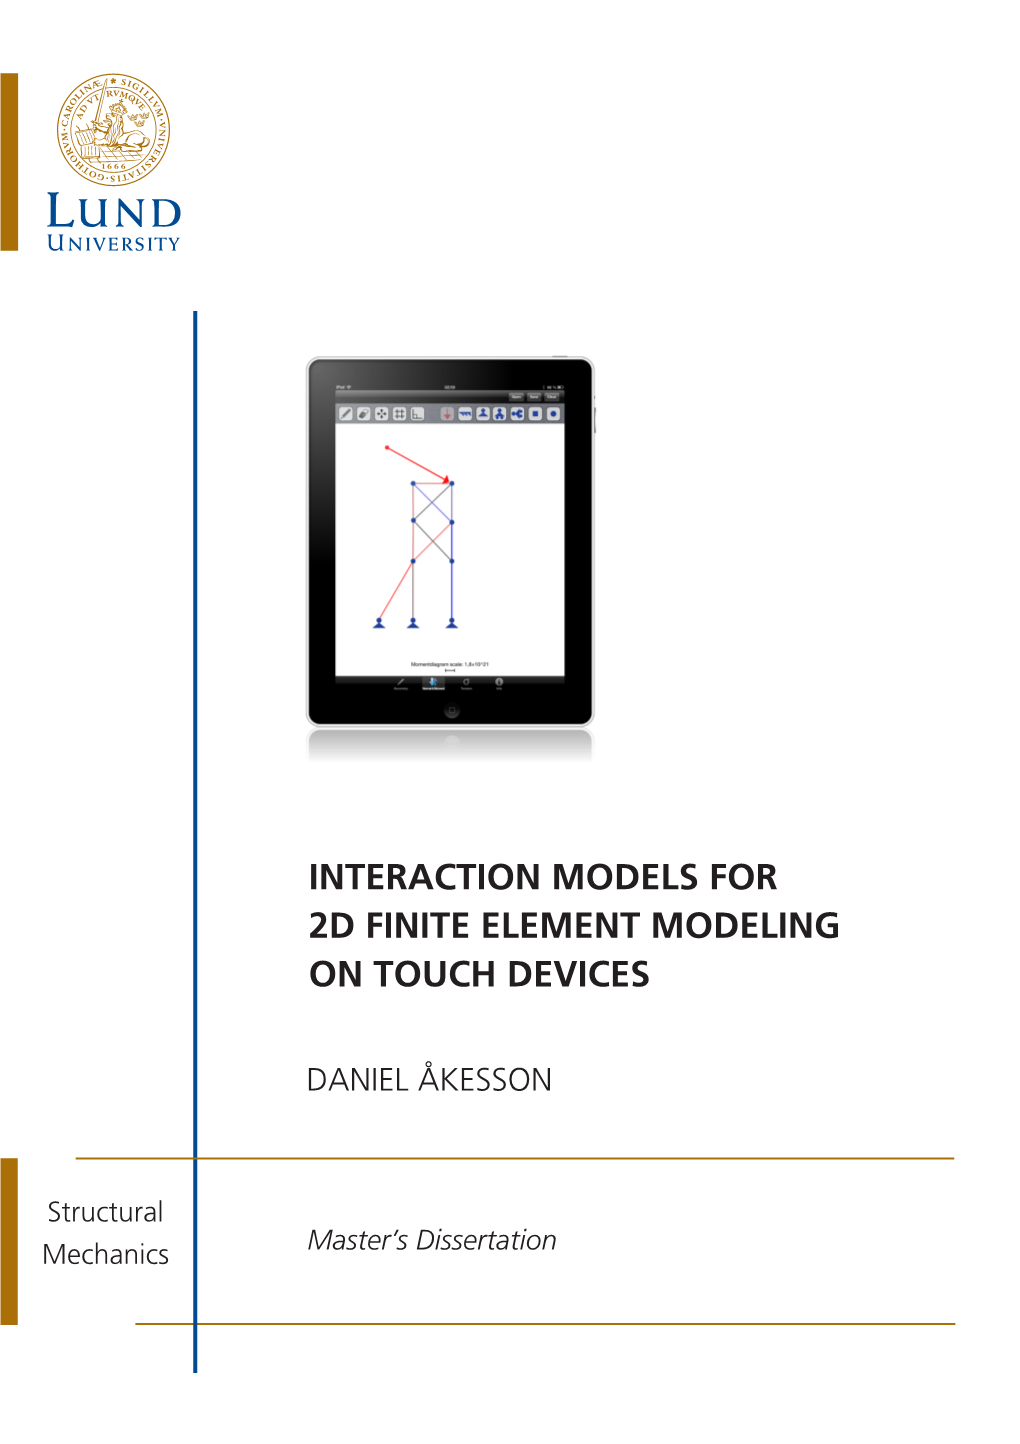 Interaction Models for 2D Finite Element Modeling on Touch Devices